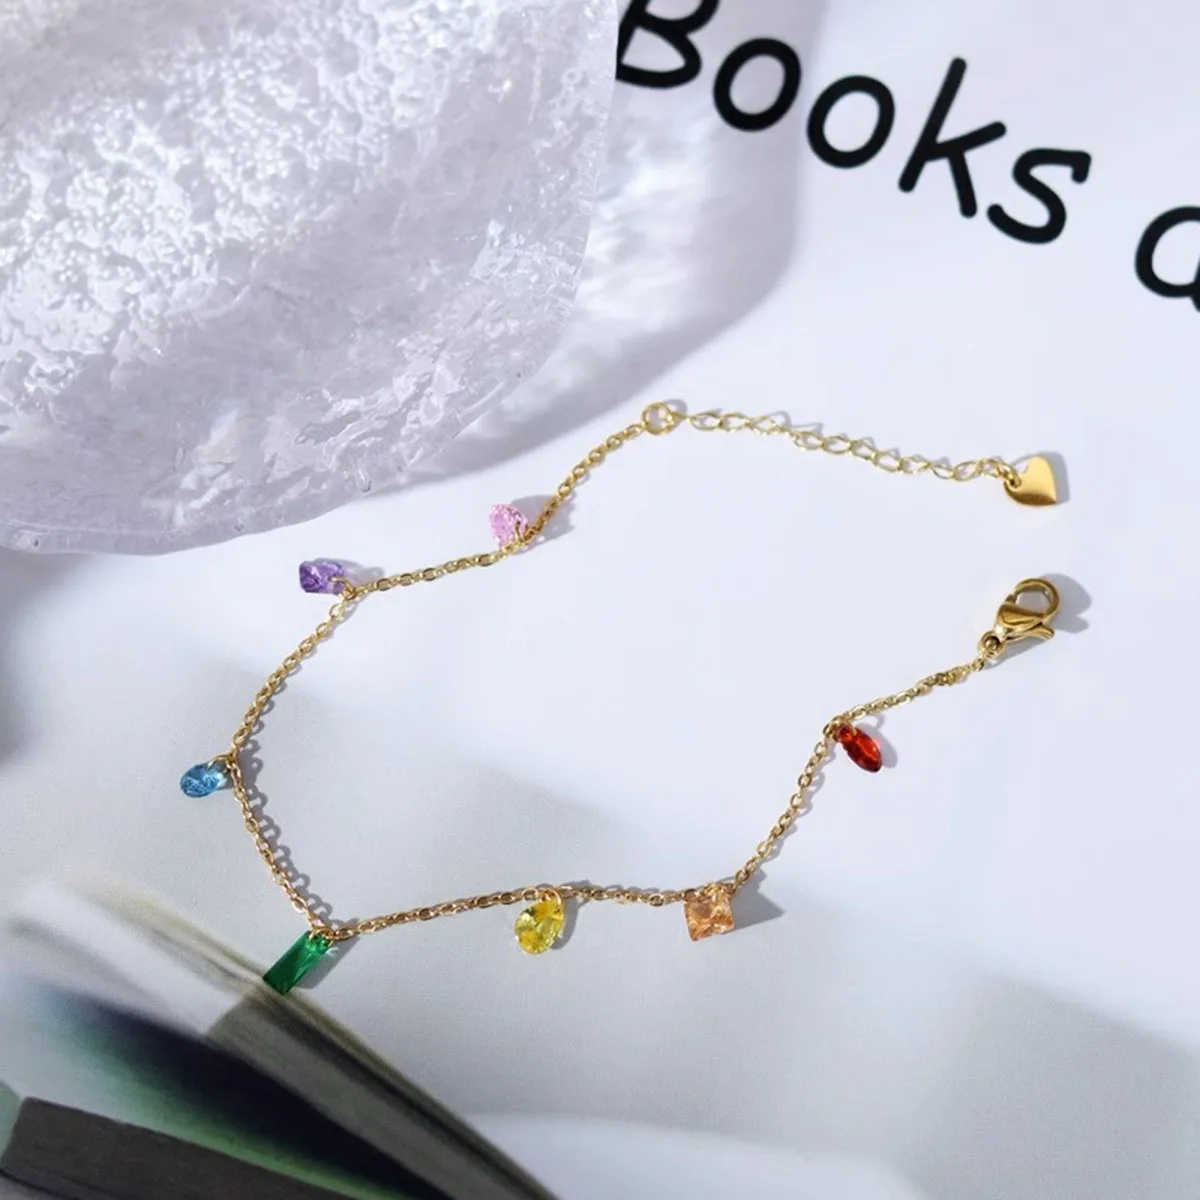 Colorful Beads Sparkling Stainless Steel Gold Plated Stacked Chain Cute Anklet Women Girls Students Gift Fashion Jewelry